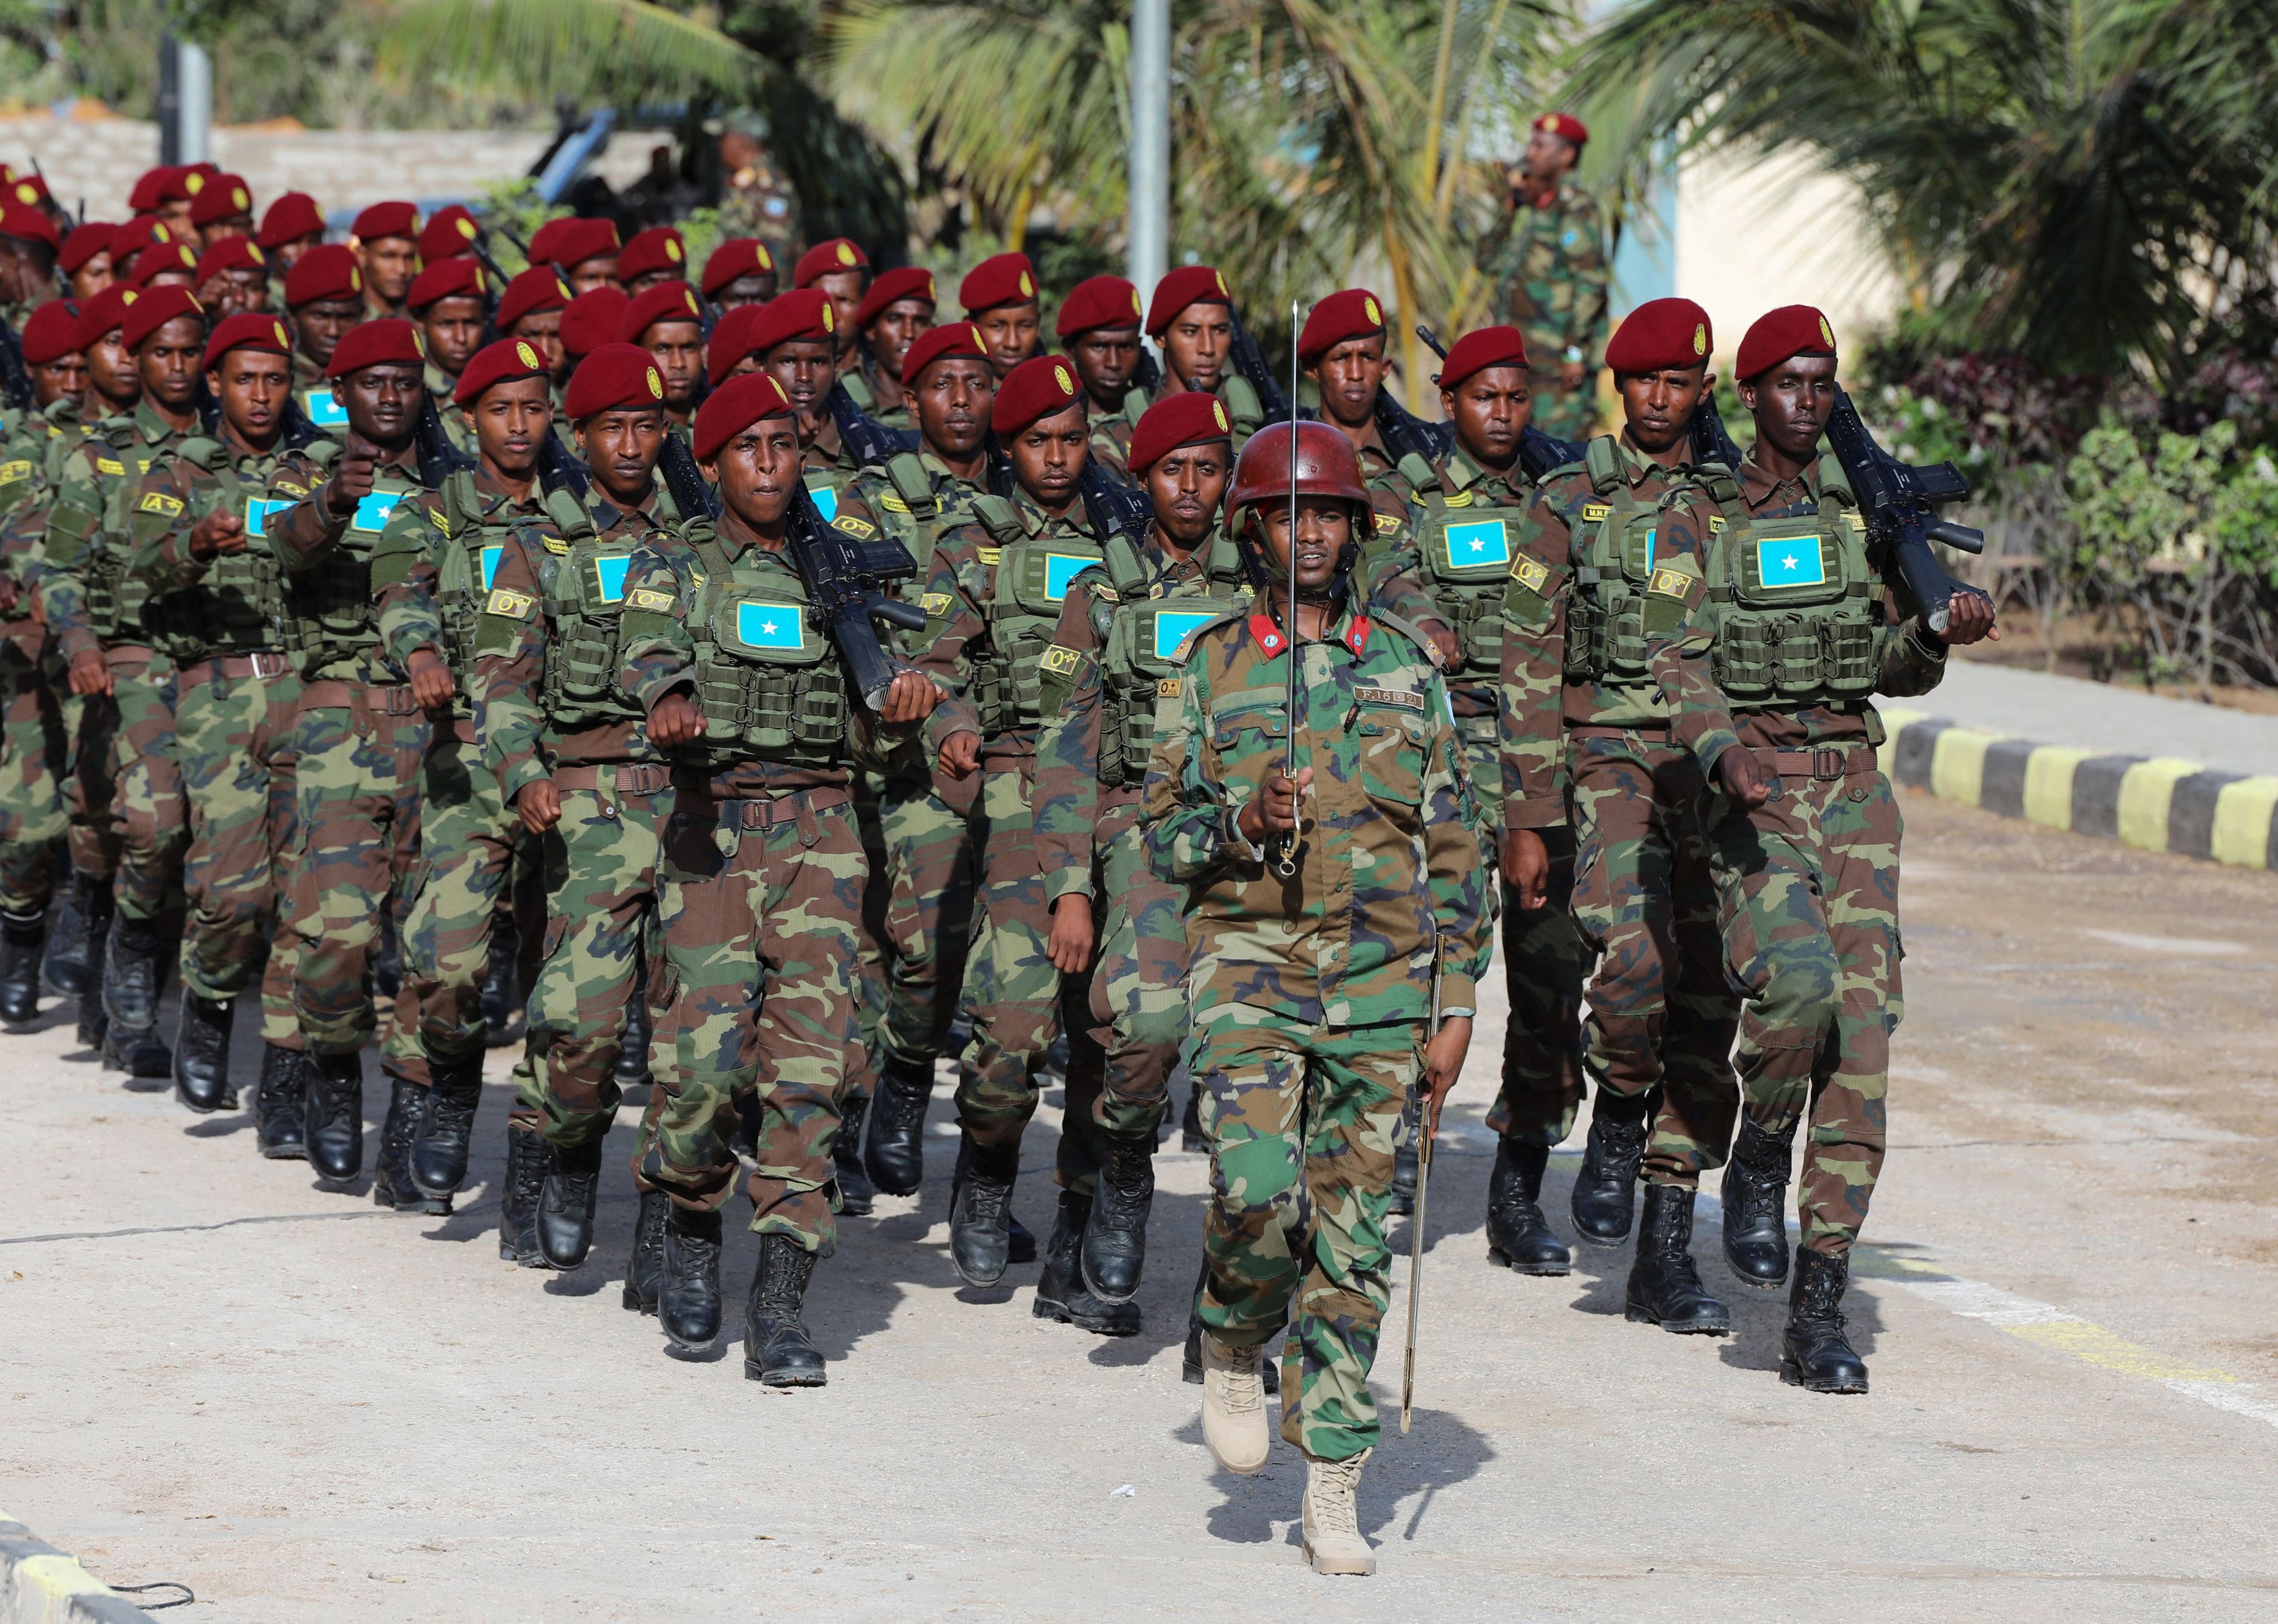 Somalia National Army personnel march during celebrations on their 62nd anniversary.